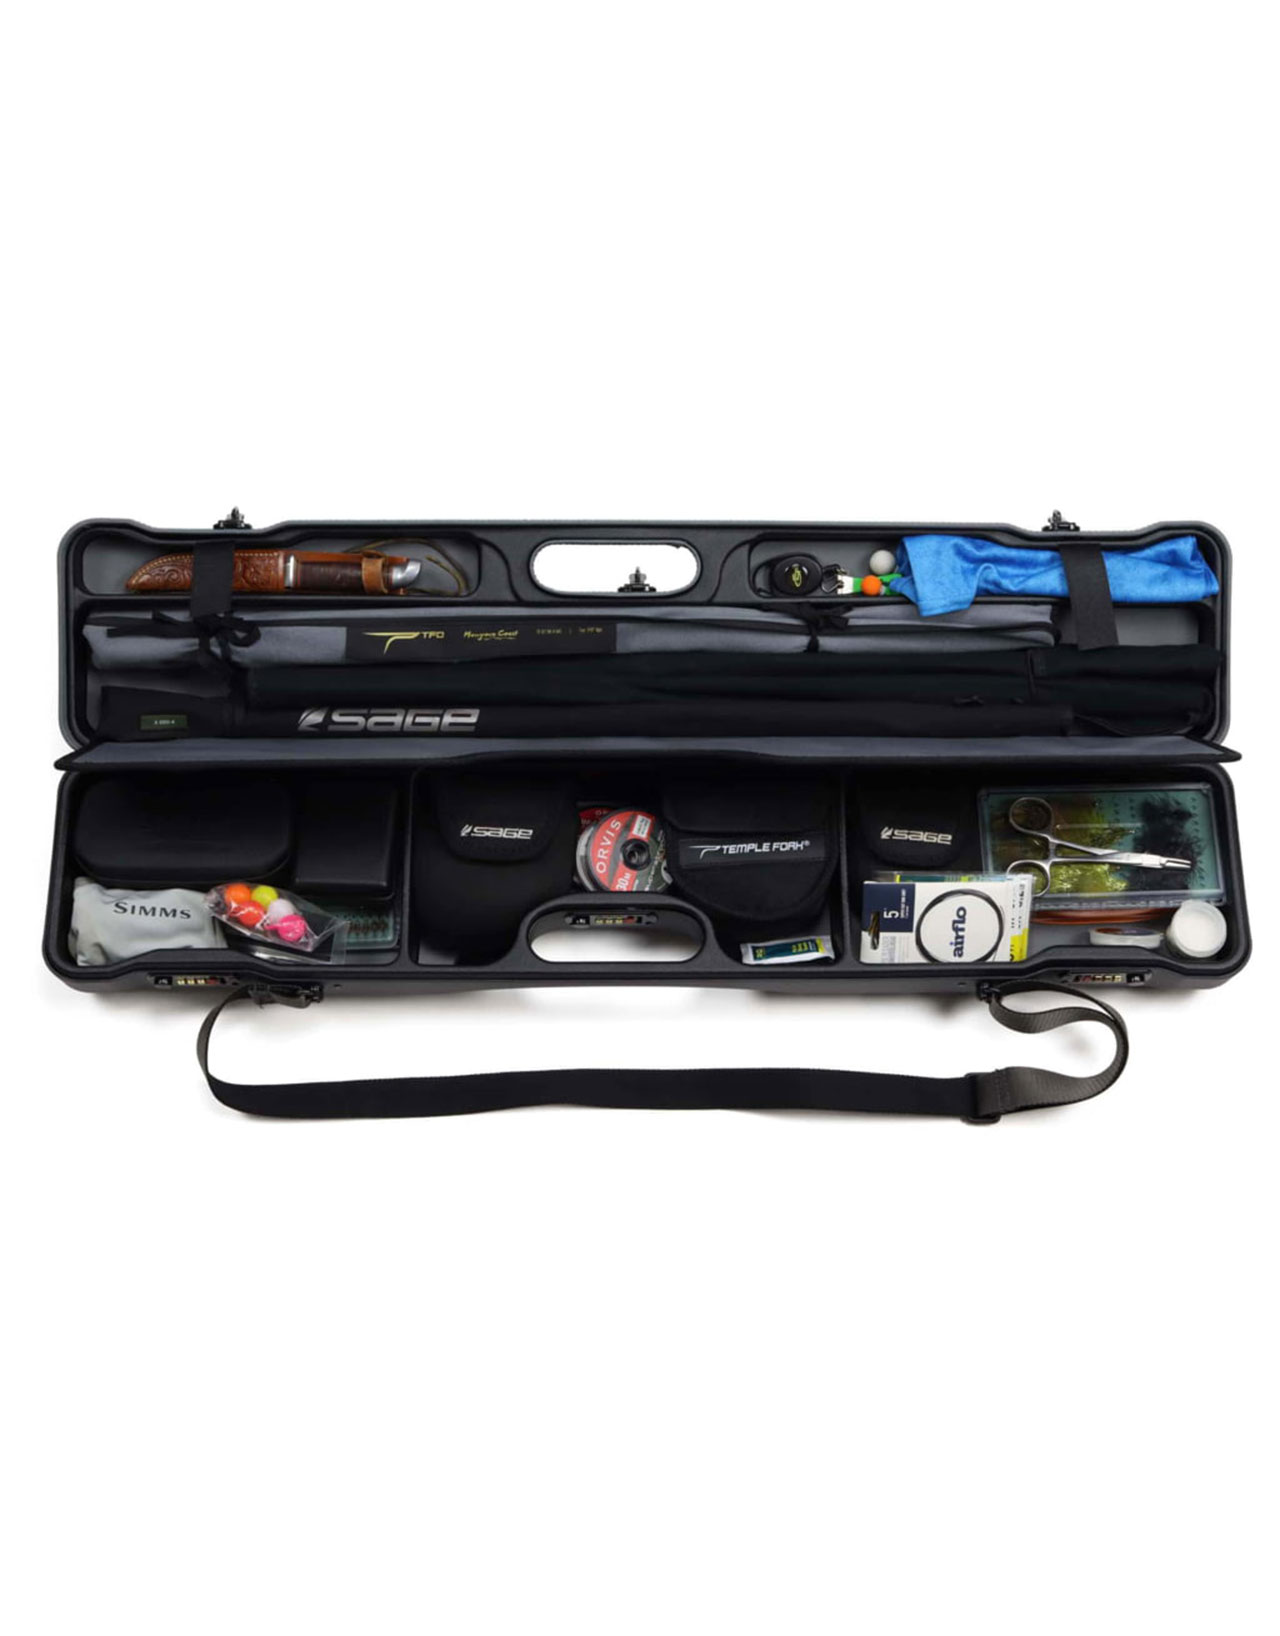 https://cdn11.bigcommerce.com/s-872z727645/images/stencil/original/products/383/4589/riffle-qr-daily-fly-fishing-rod-travel-case-4__50426.1687816602.jpg